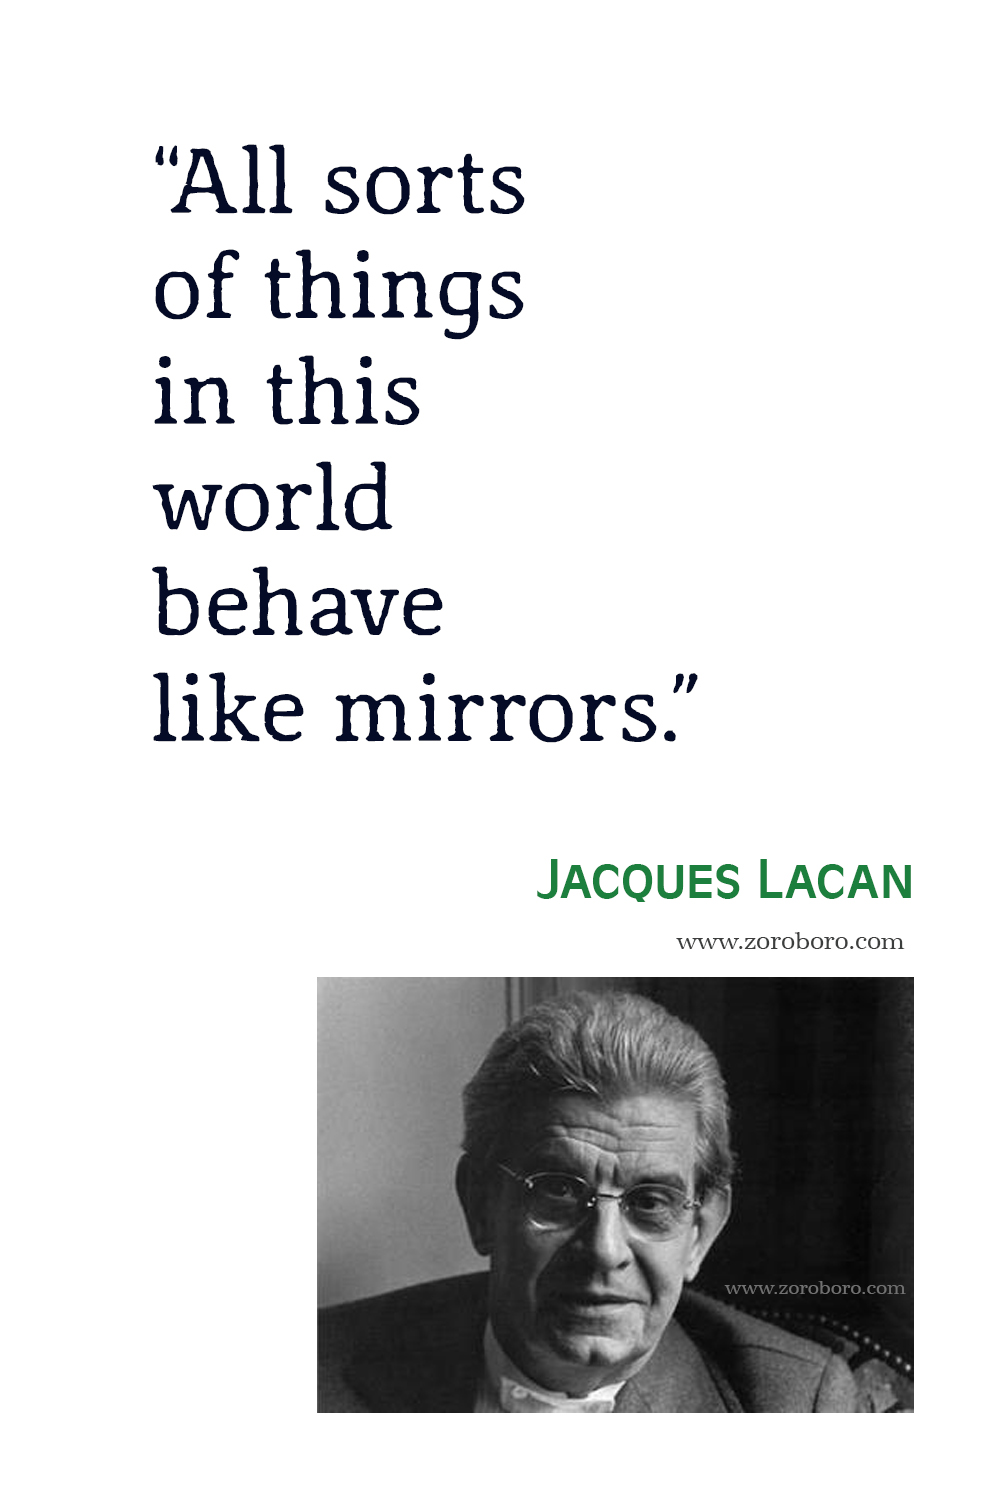 Jacques Lacan Quotes, Jacques Lacan Books, Jacques Lacan Poems, Jacques Lacan Poetry, Jacques Lacan Theory, Jacques Lacan .